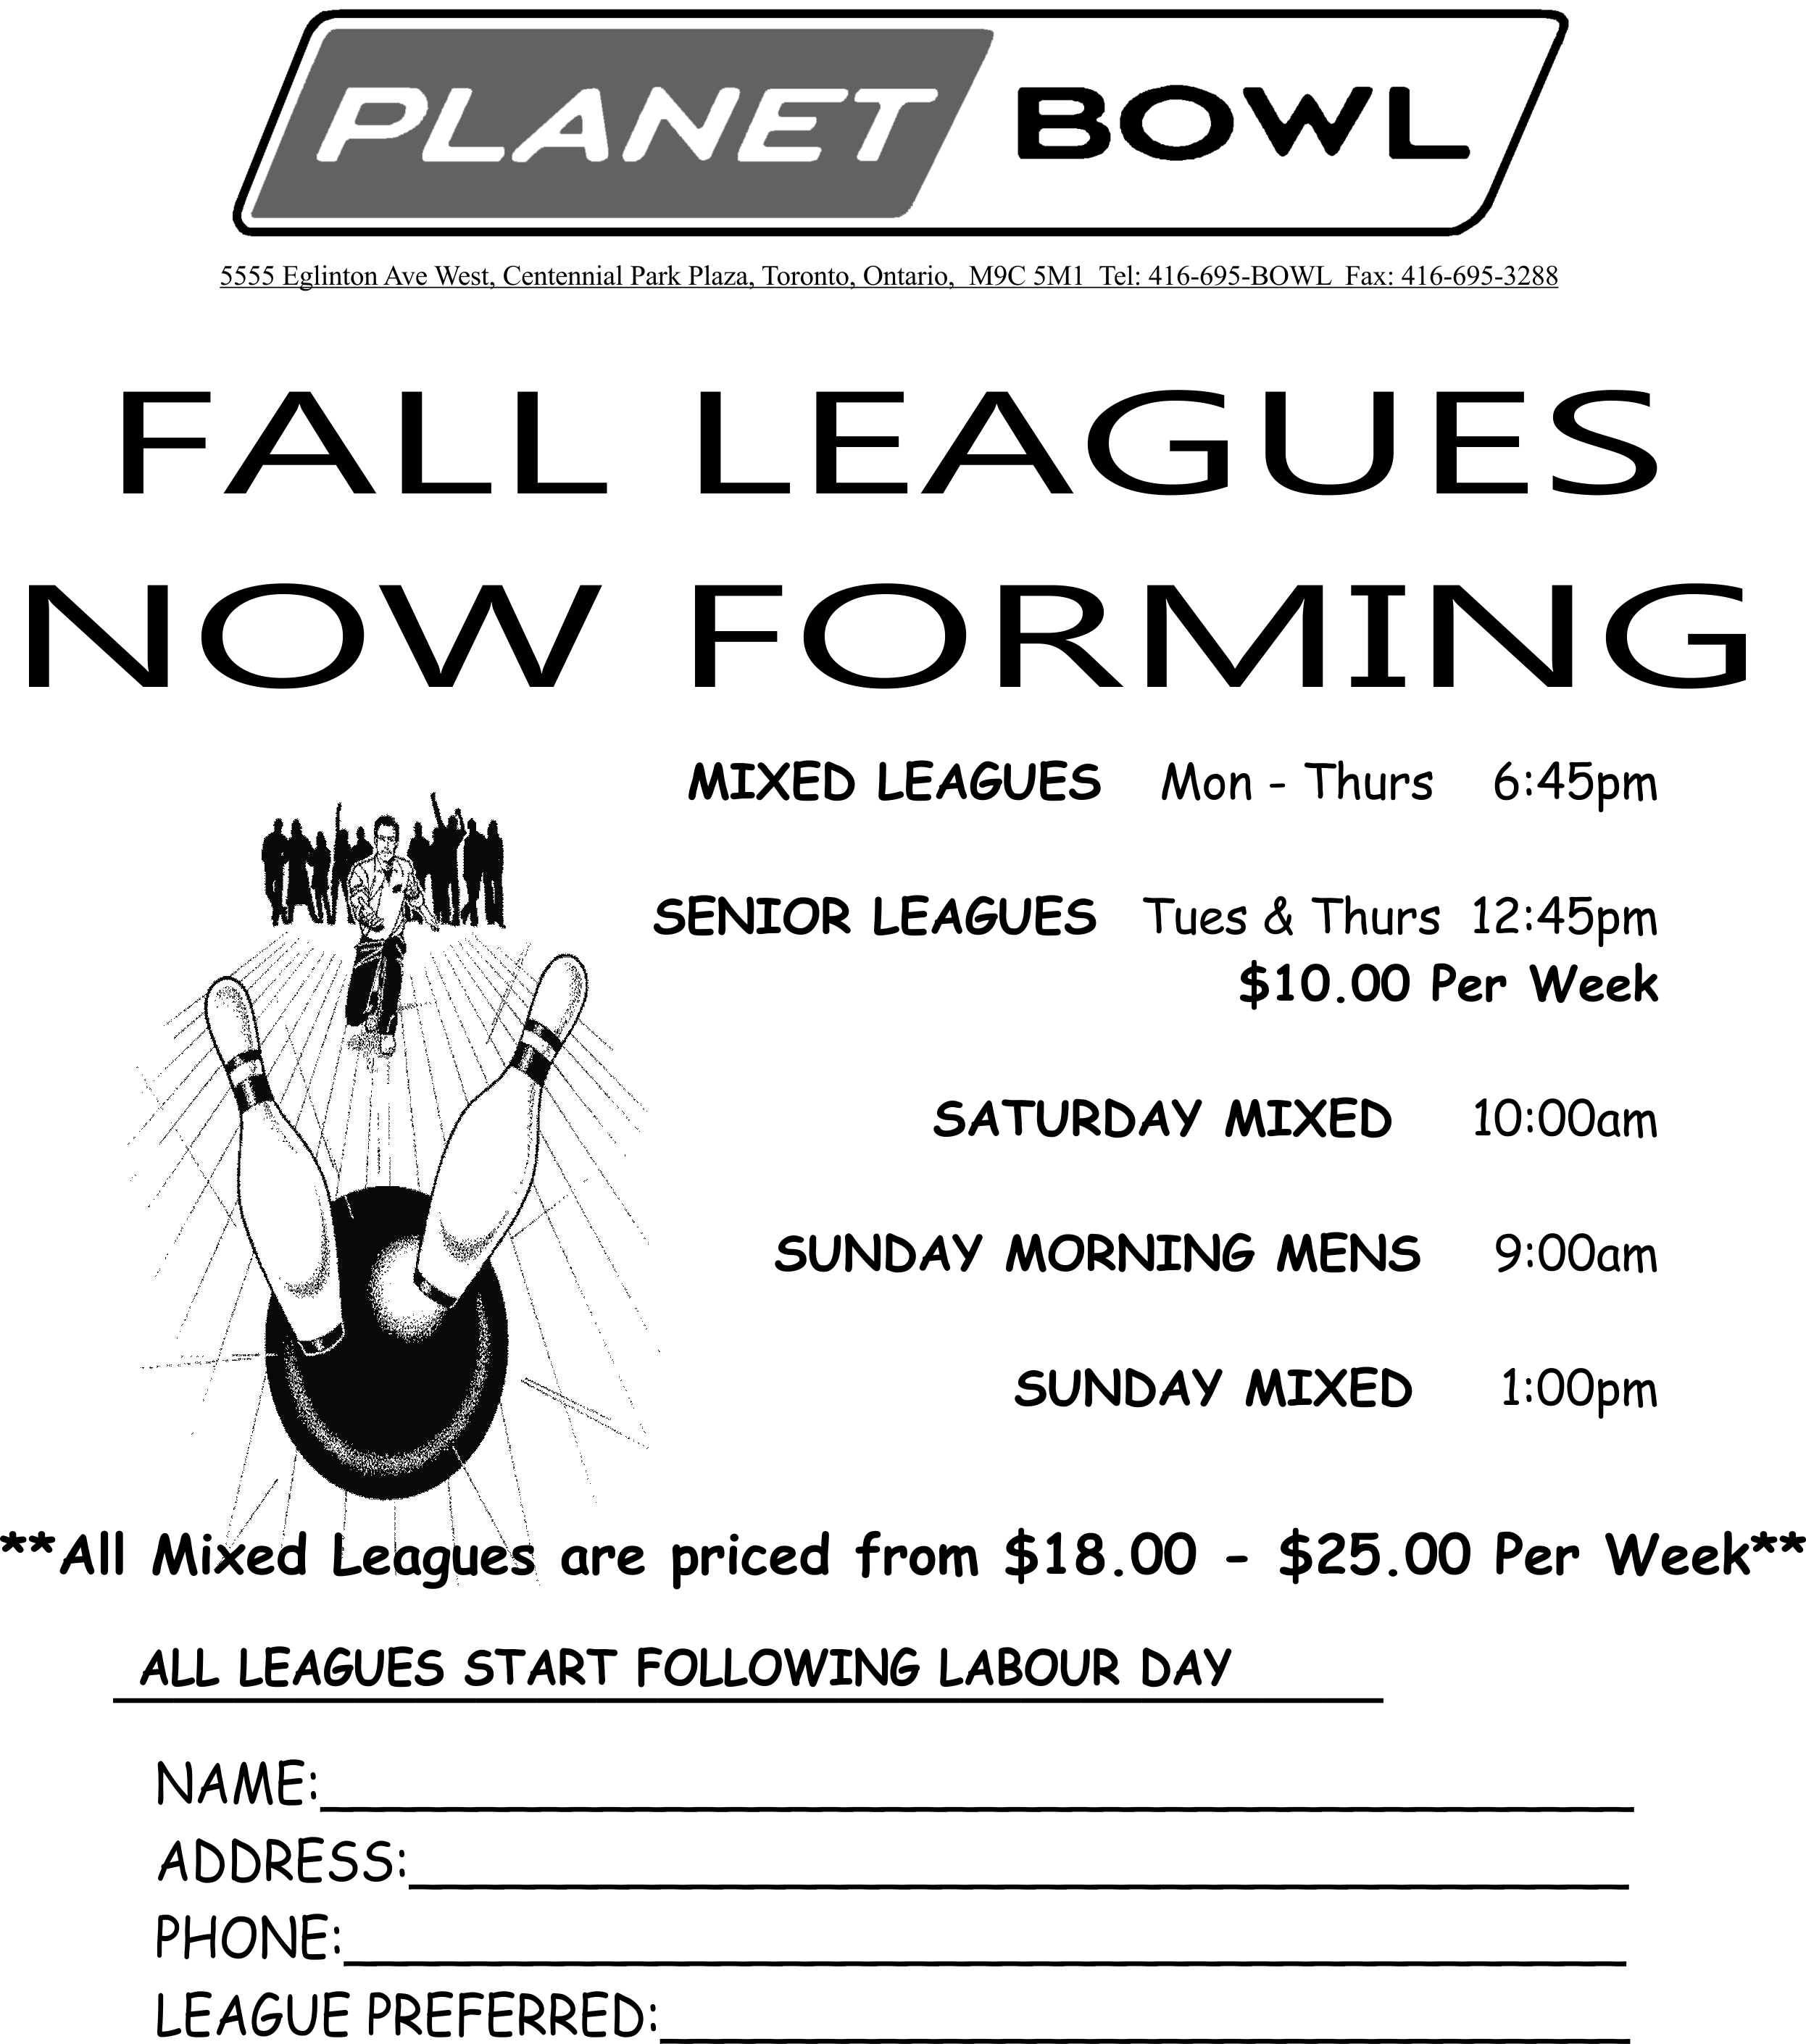 Backup_of_Flyer - Fall Leagues Forming